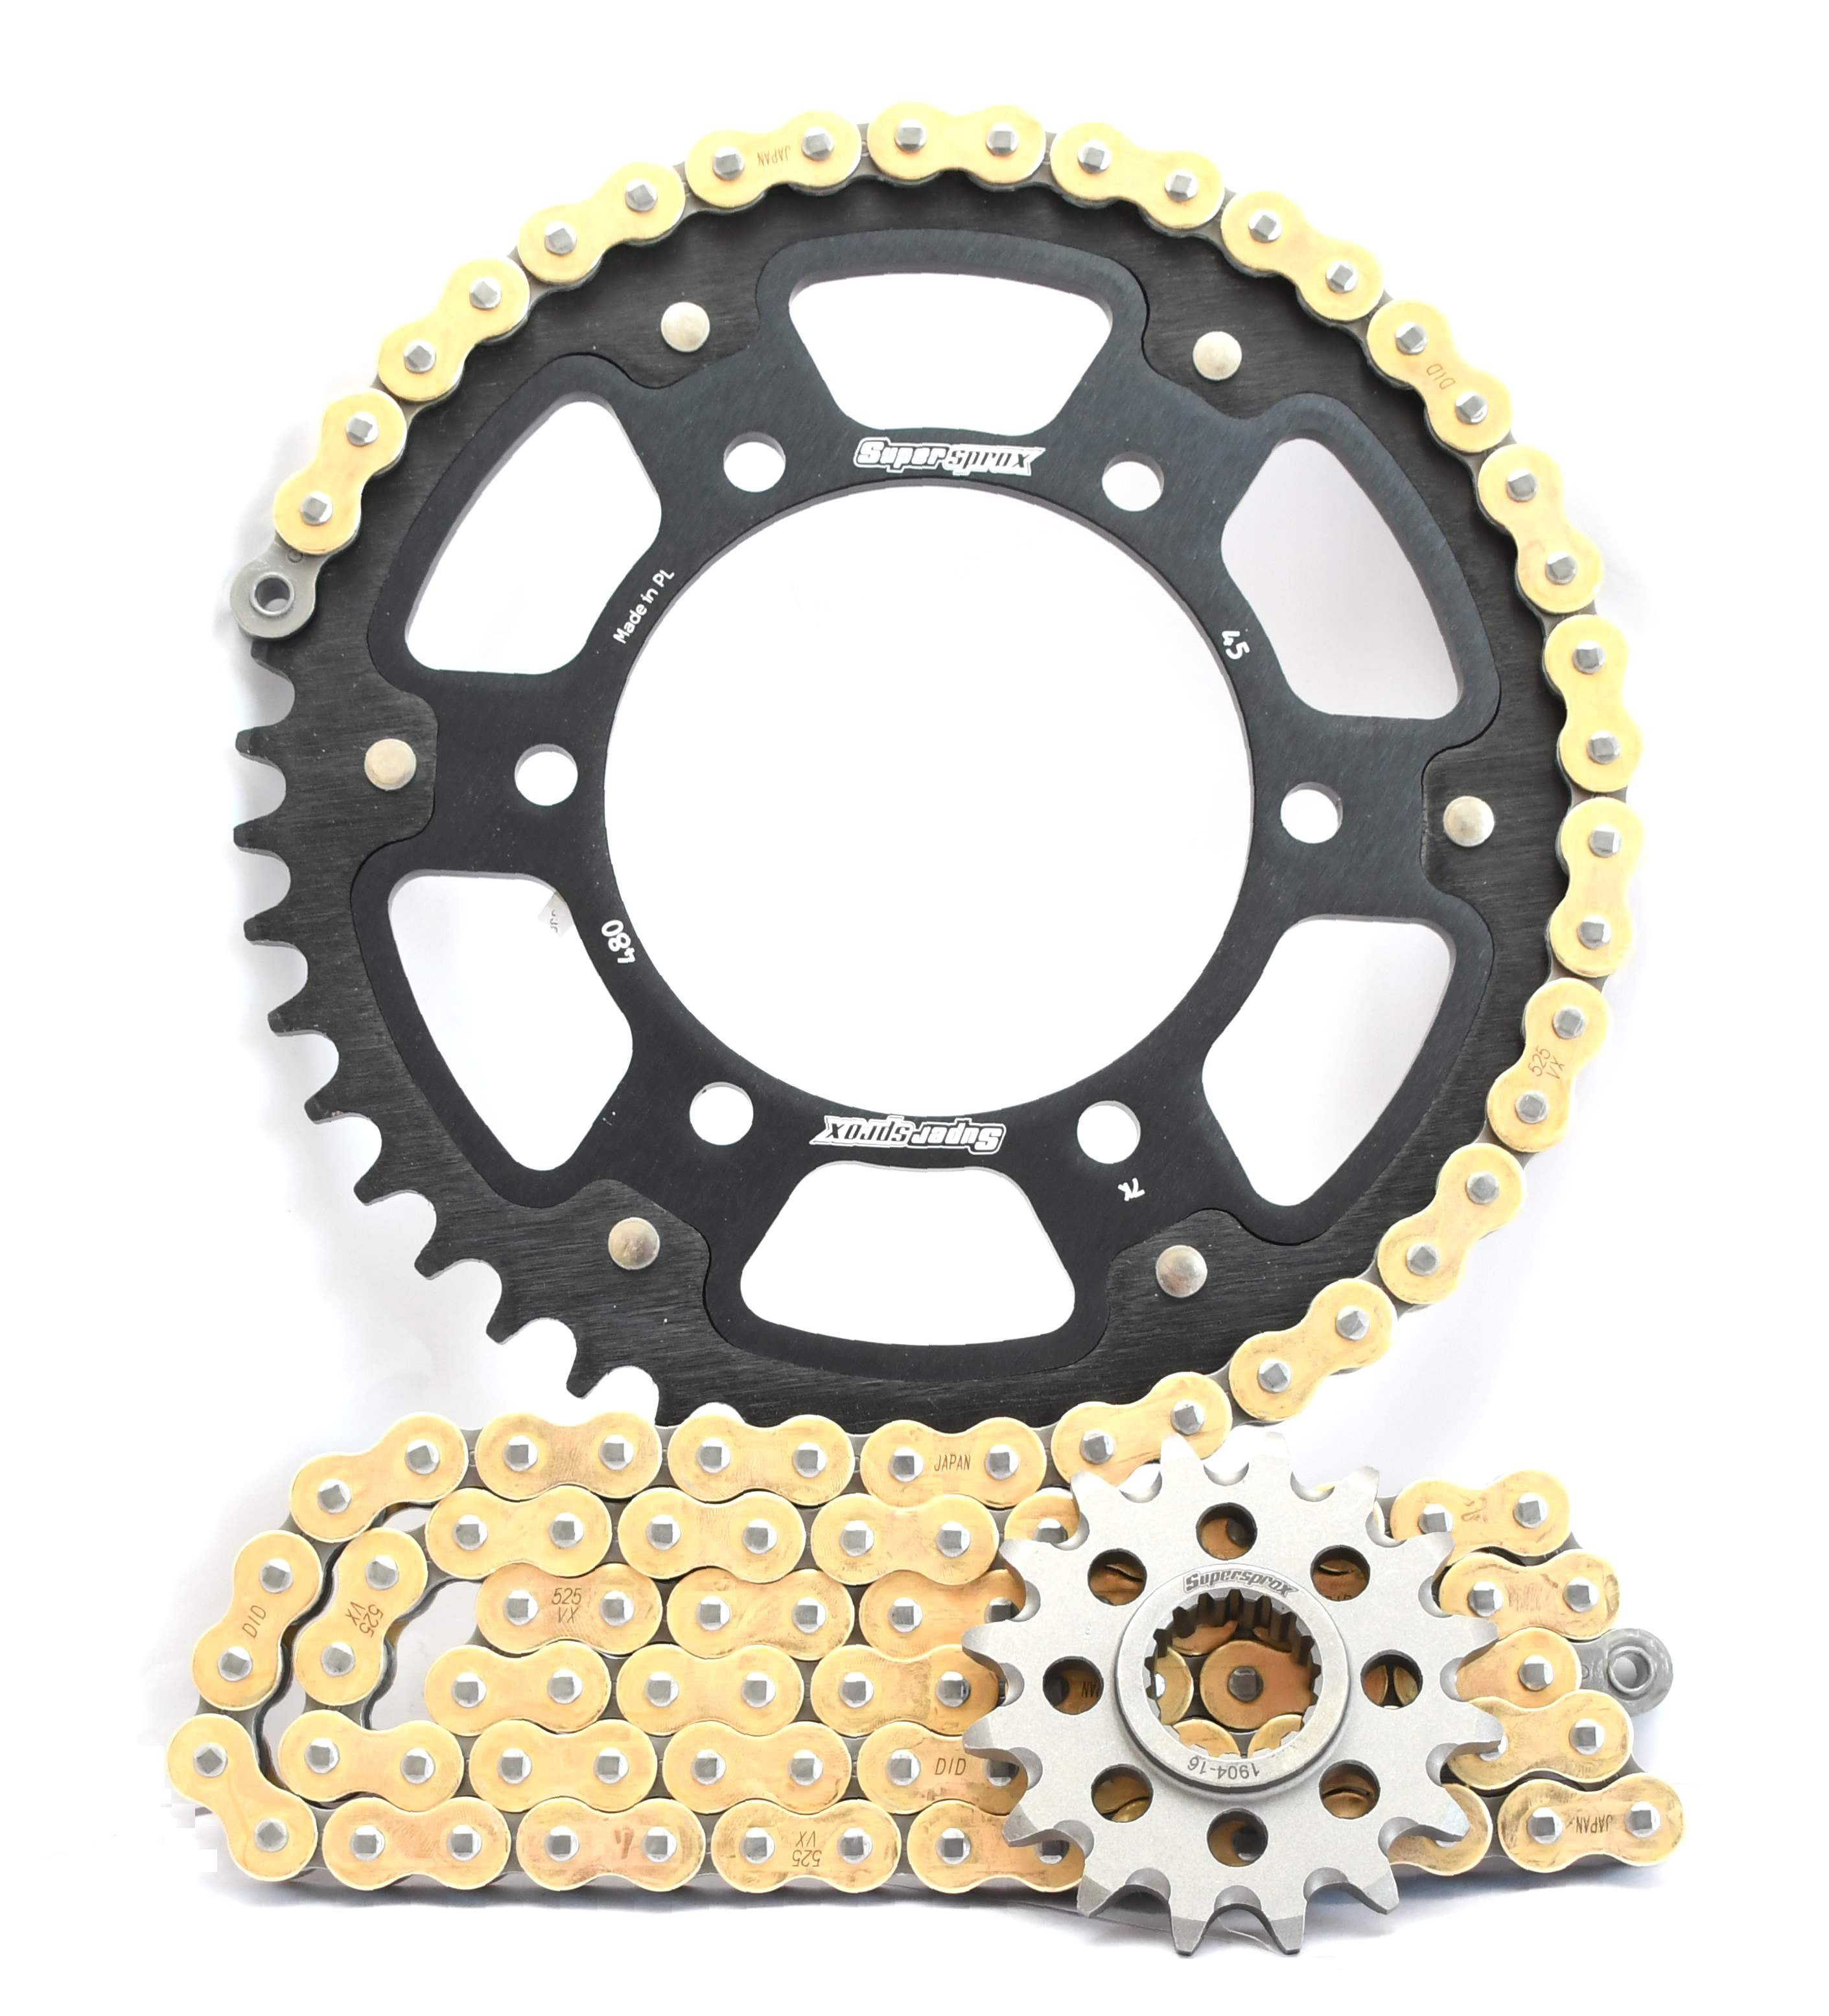 Supersprox Chain & Sprocket Kit for Yamaha YZF R1 2009-2014 - Standard Gearing